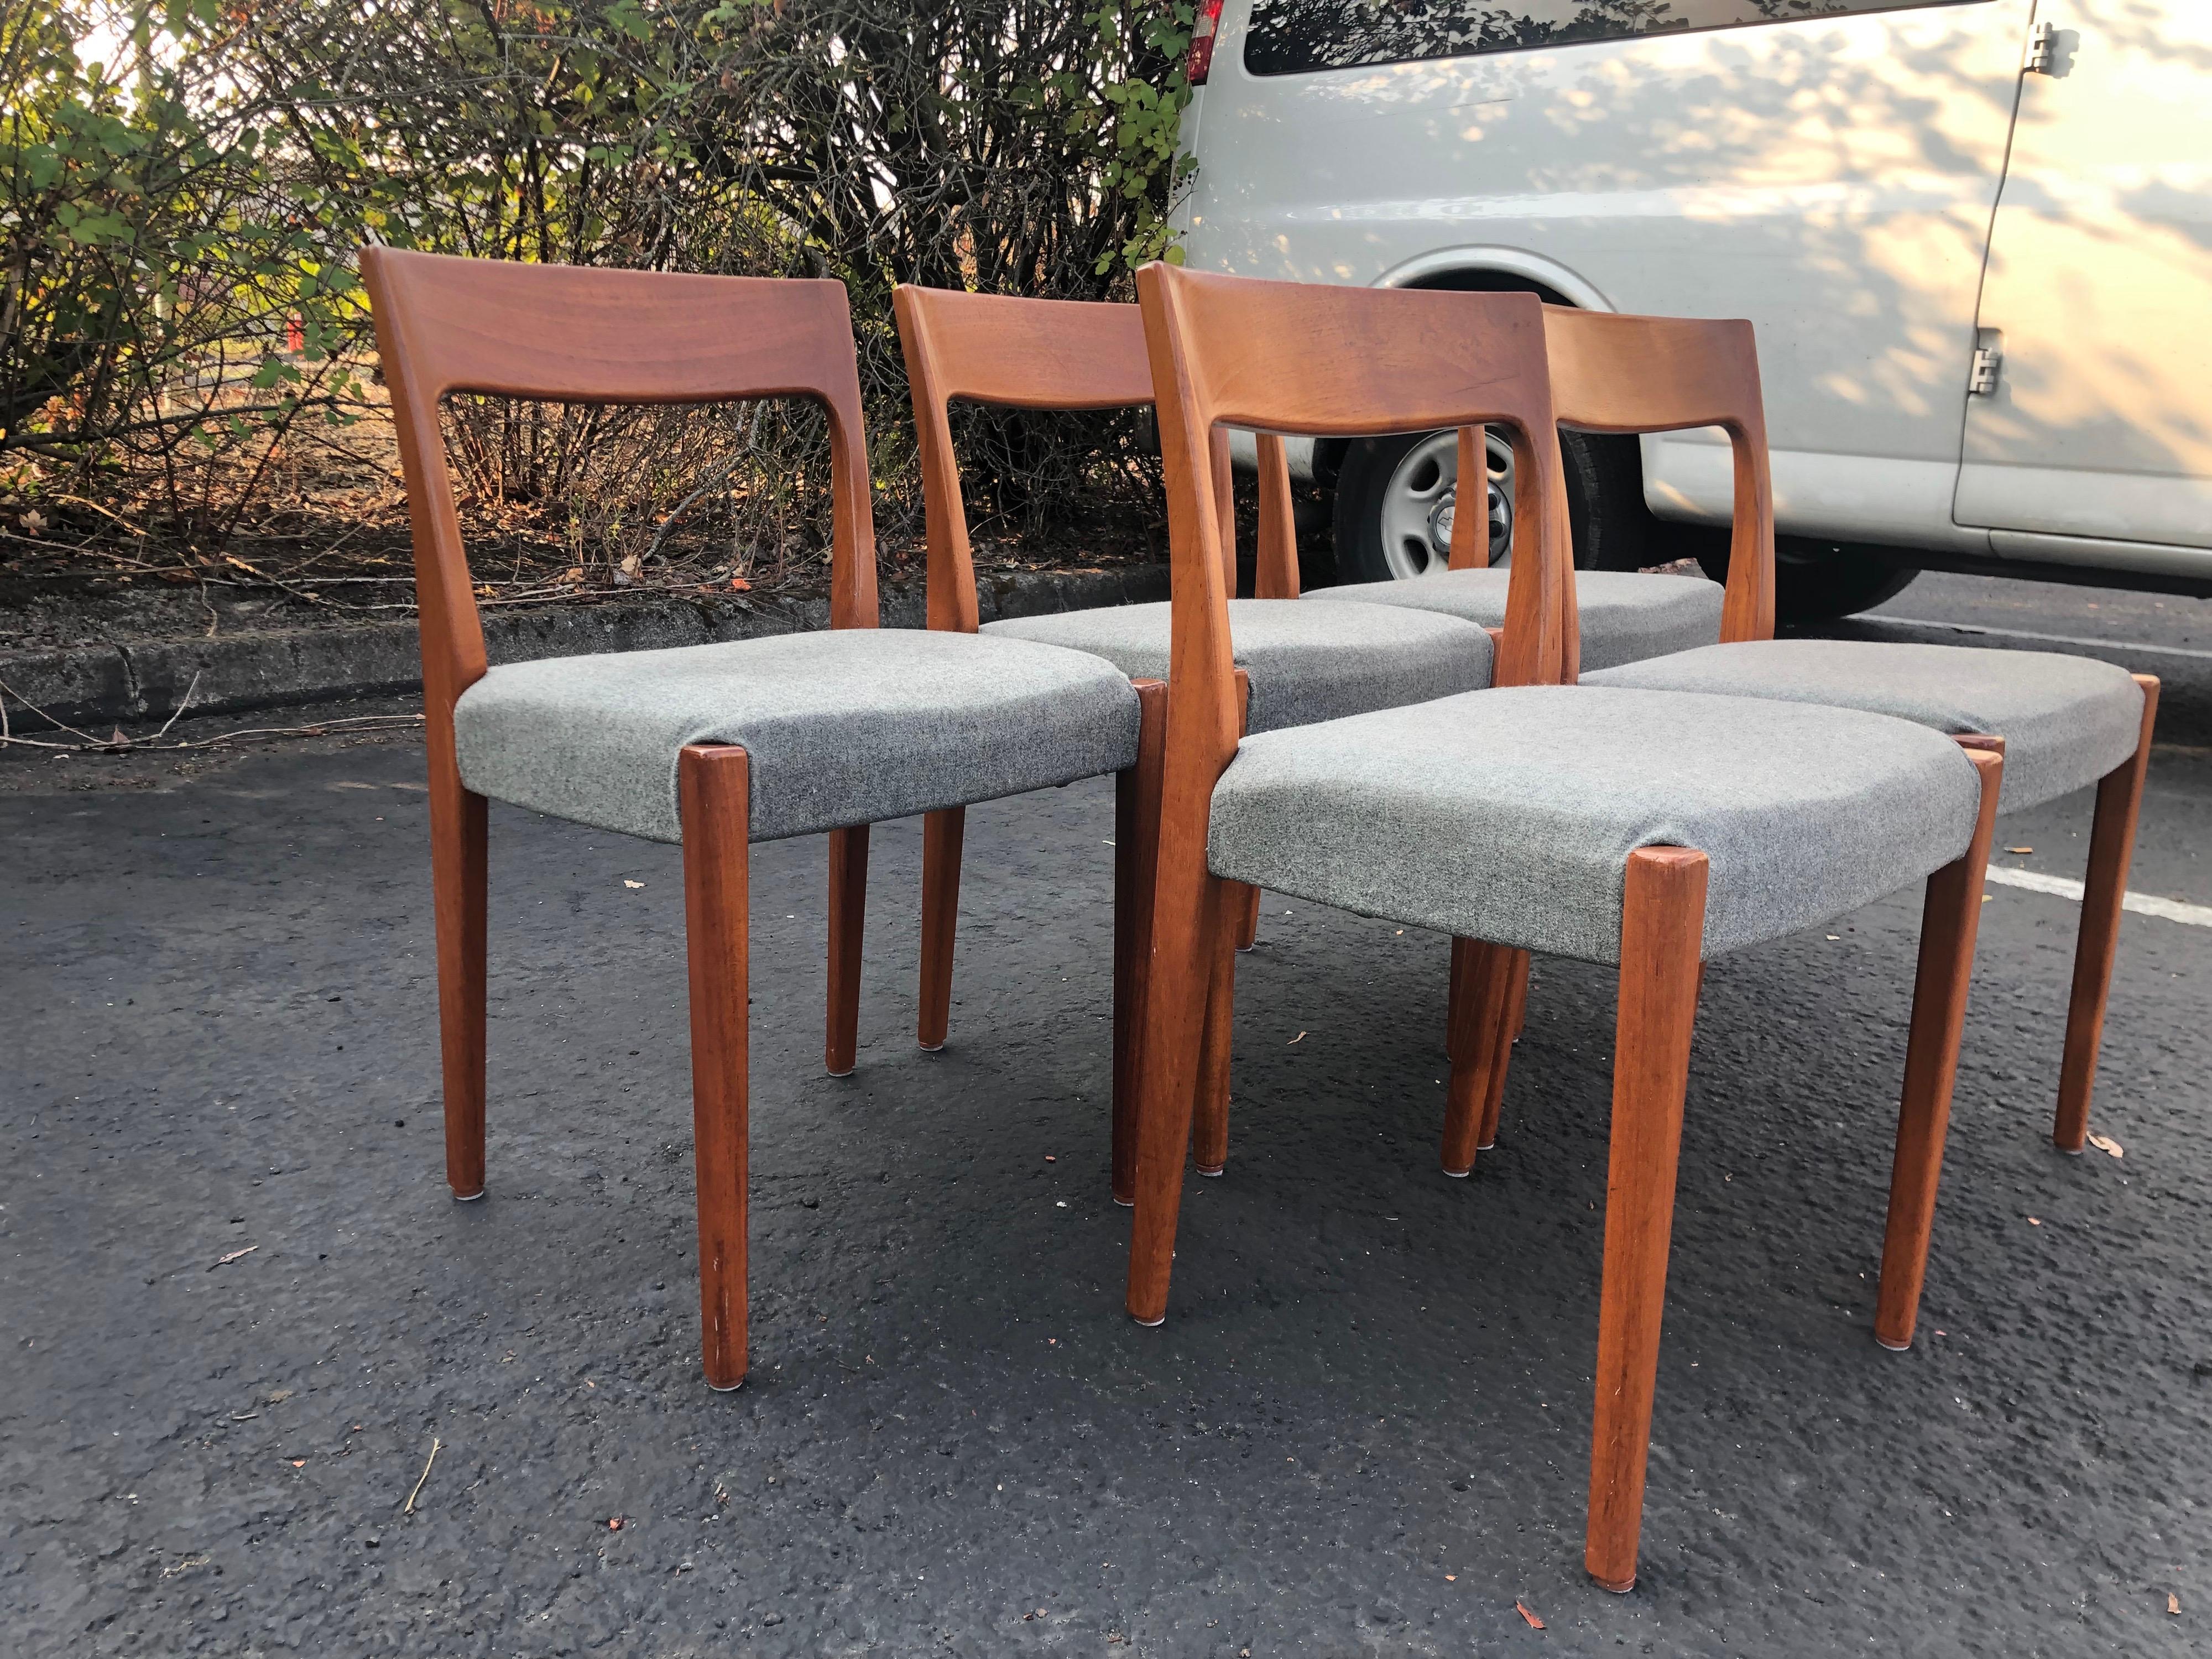 We are delighted to offer for sale this lovely suite of four original Danish teak dining chairs. These chairs have those beautiful lines you only find with very fine Danish chairs. They are in solid teak with fully reupholstered light gray pads, not